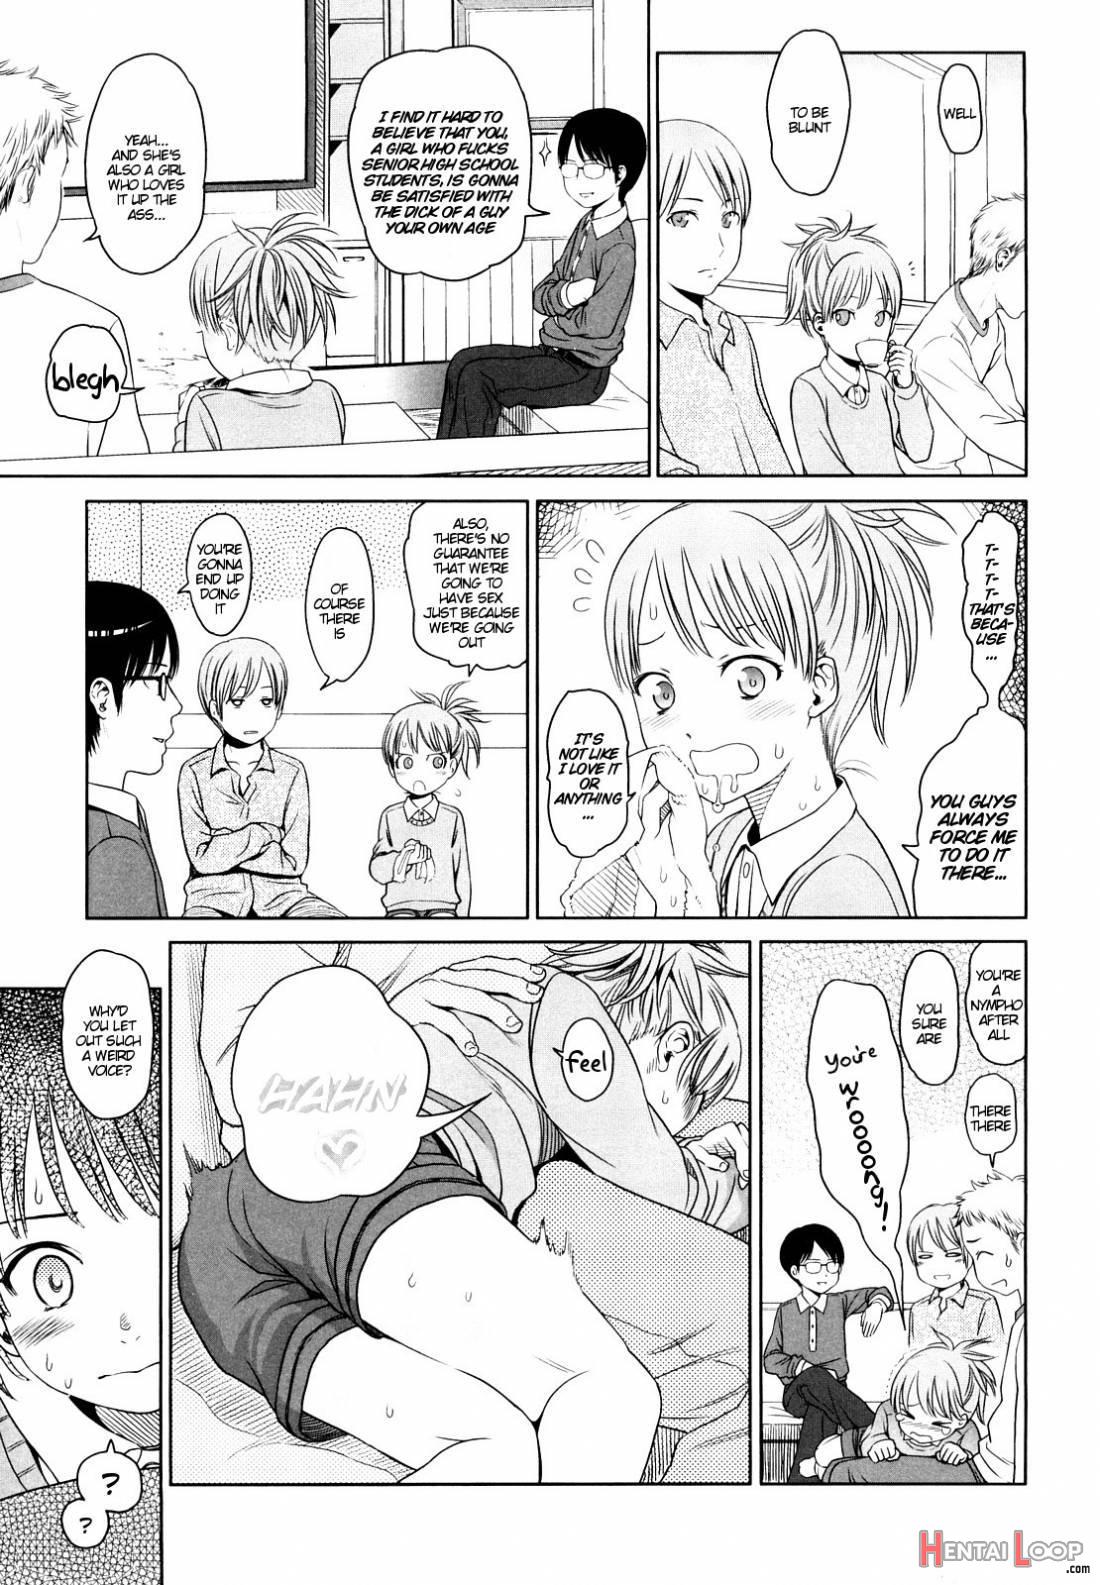 Japanese Preteen Suite page 6